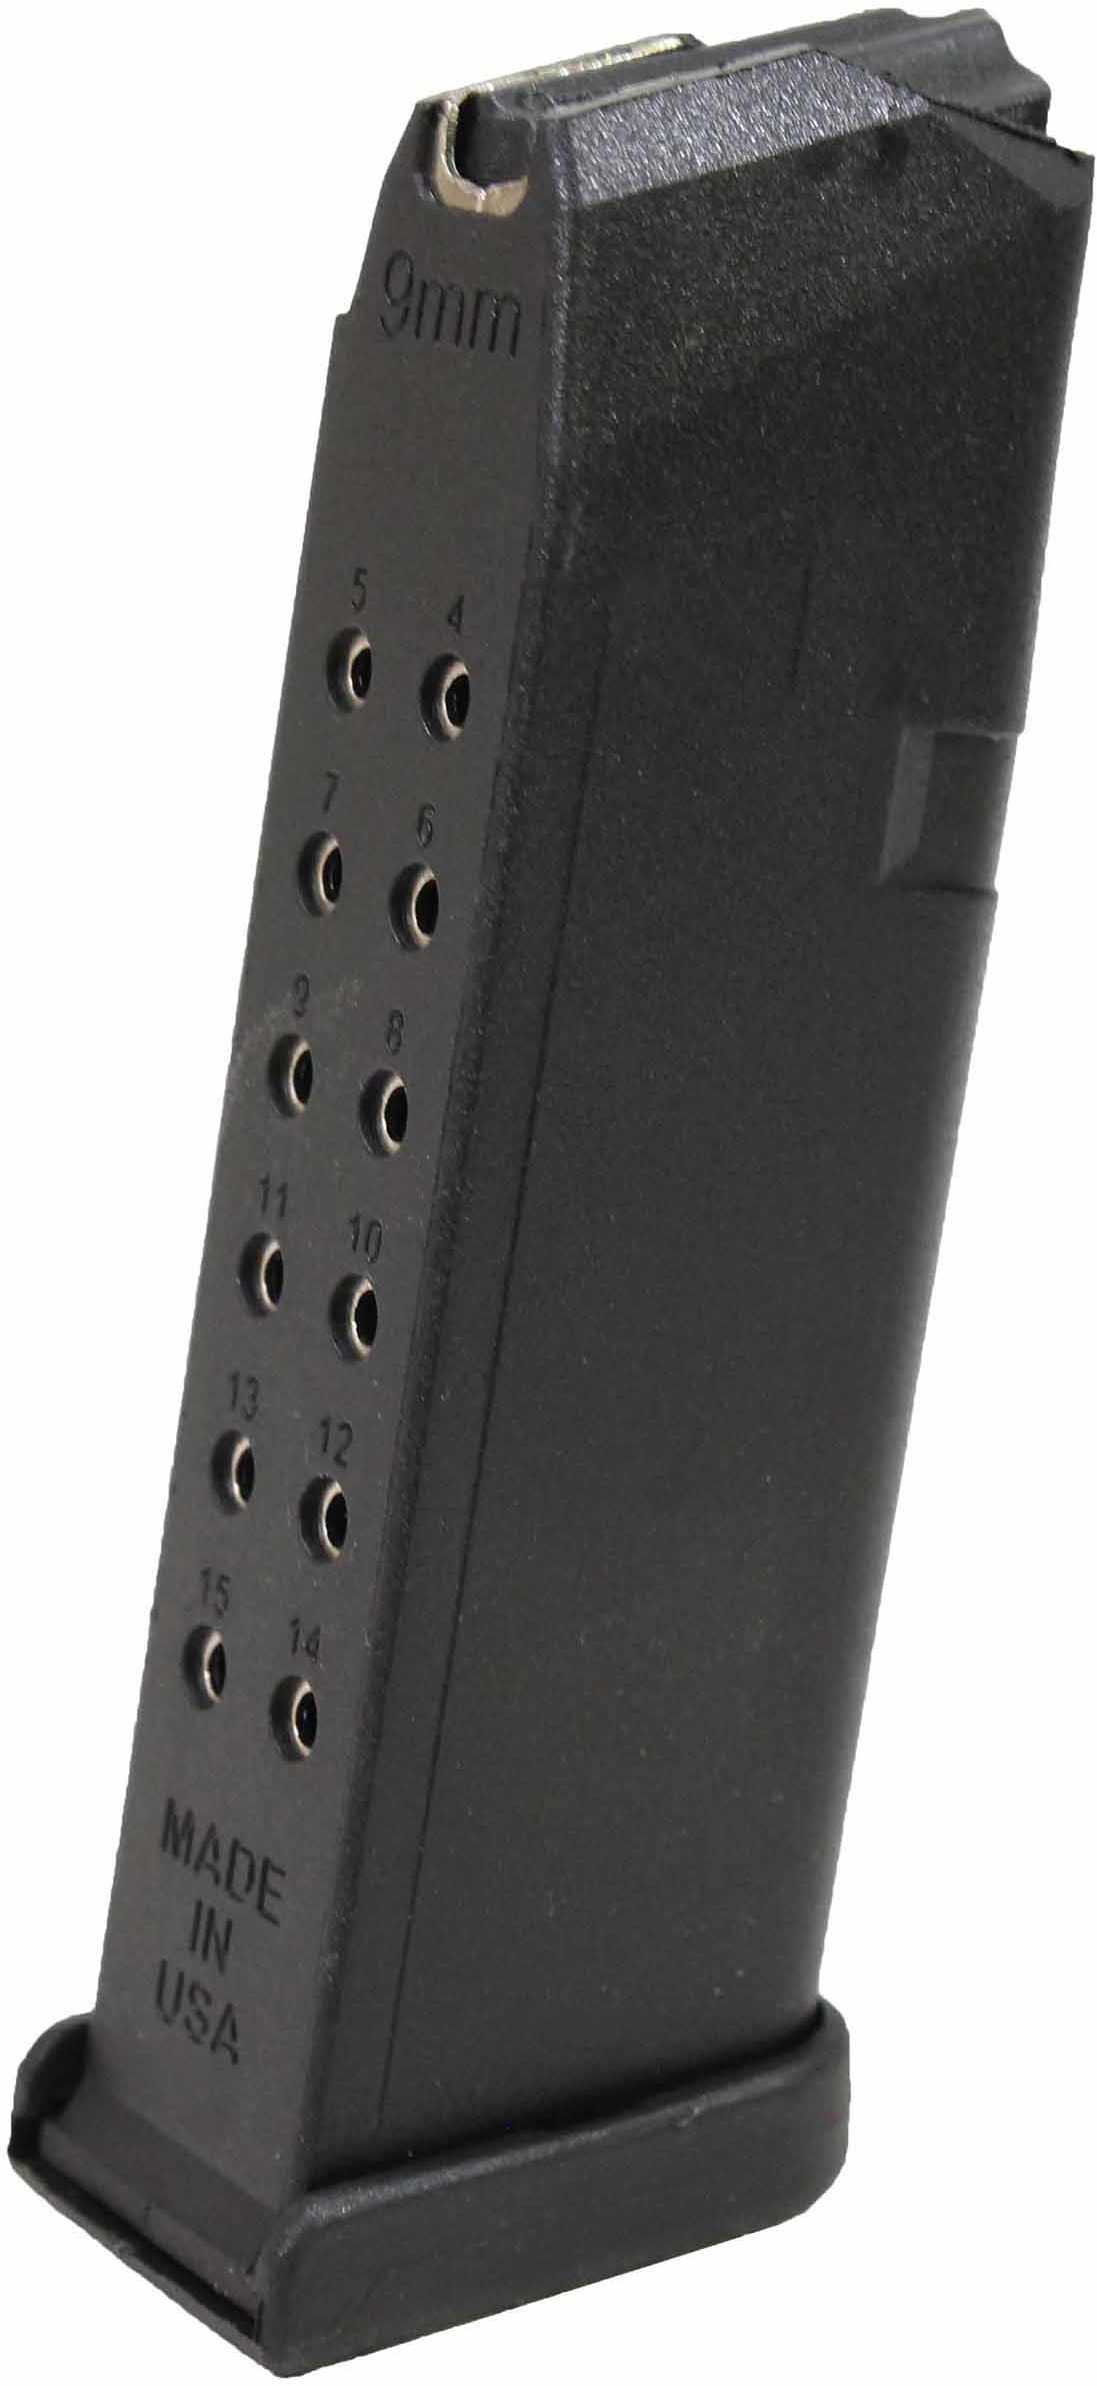 ProMag GLKA10 Replacement Magazine Fits Glock G19 9mm Luger 15 Round Polymer Black Finish